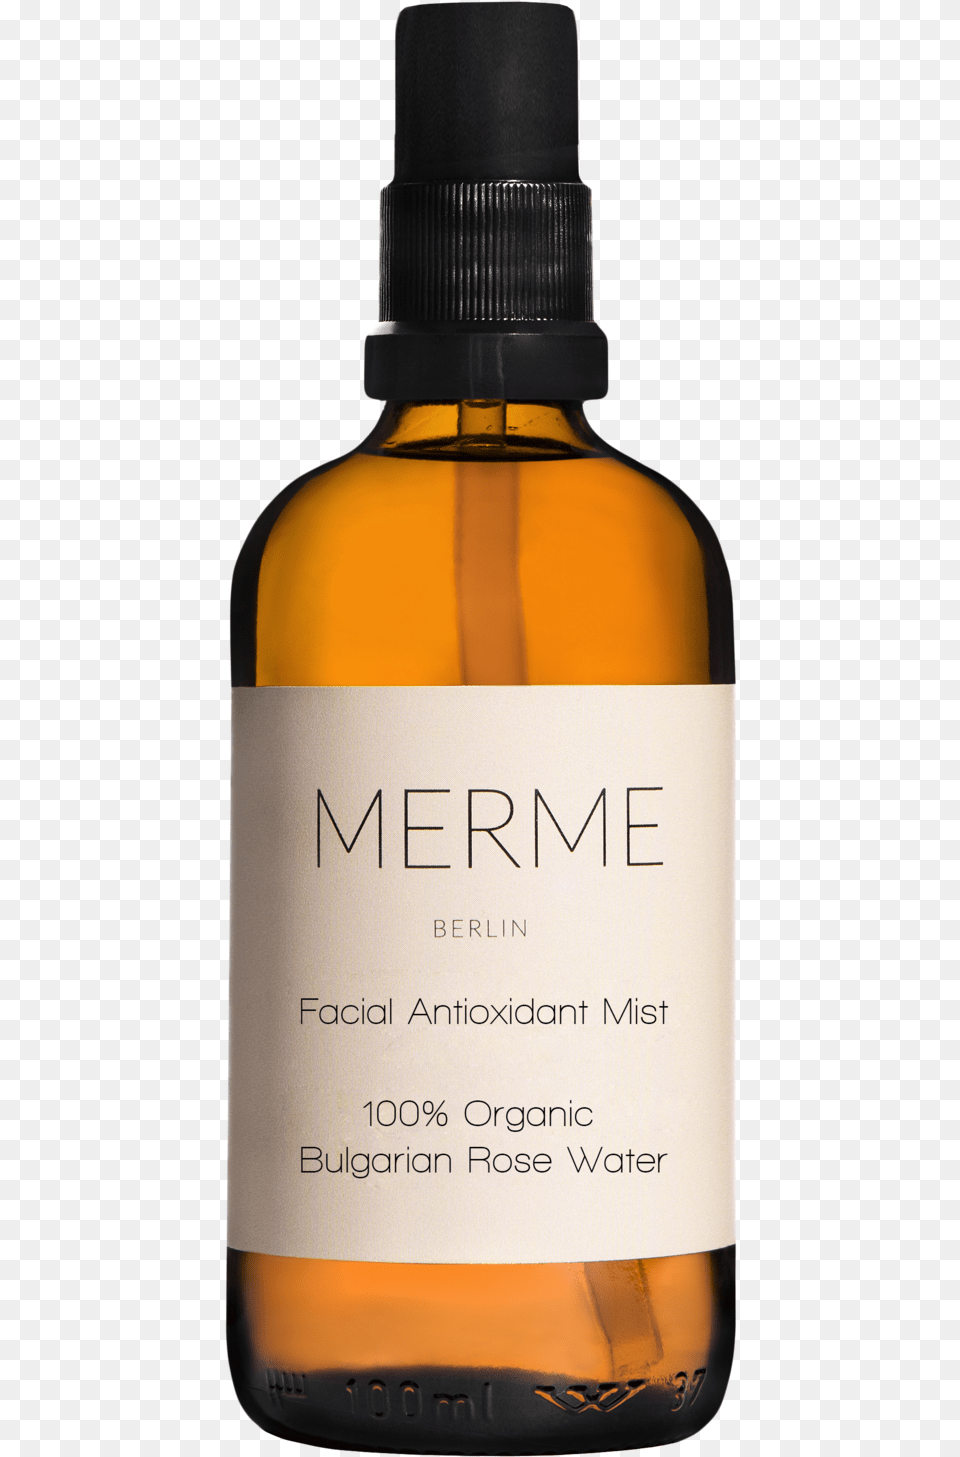 Merme Facial Antioxidant Mist, Bottle, Cosmetics, Perfume, Aftershave Png Image